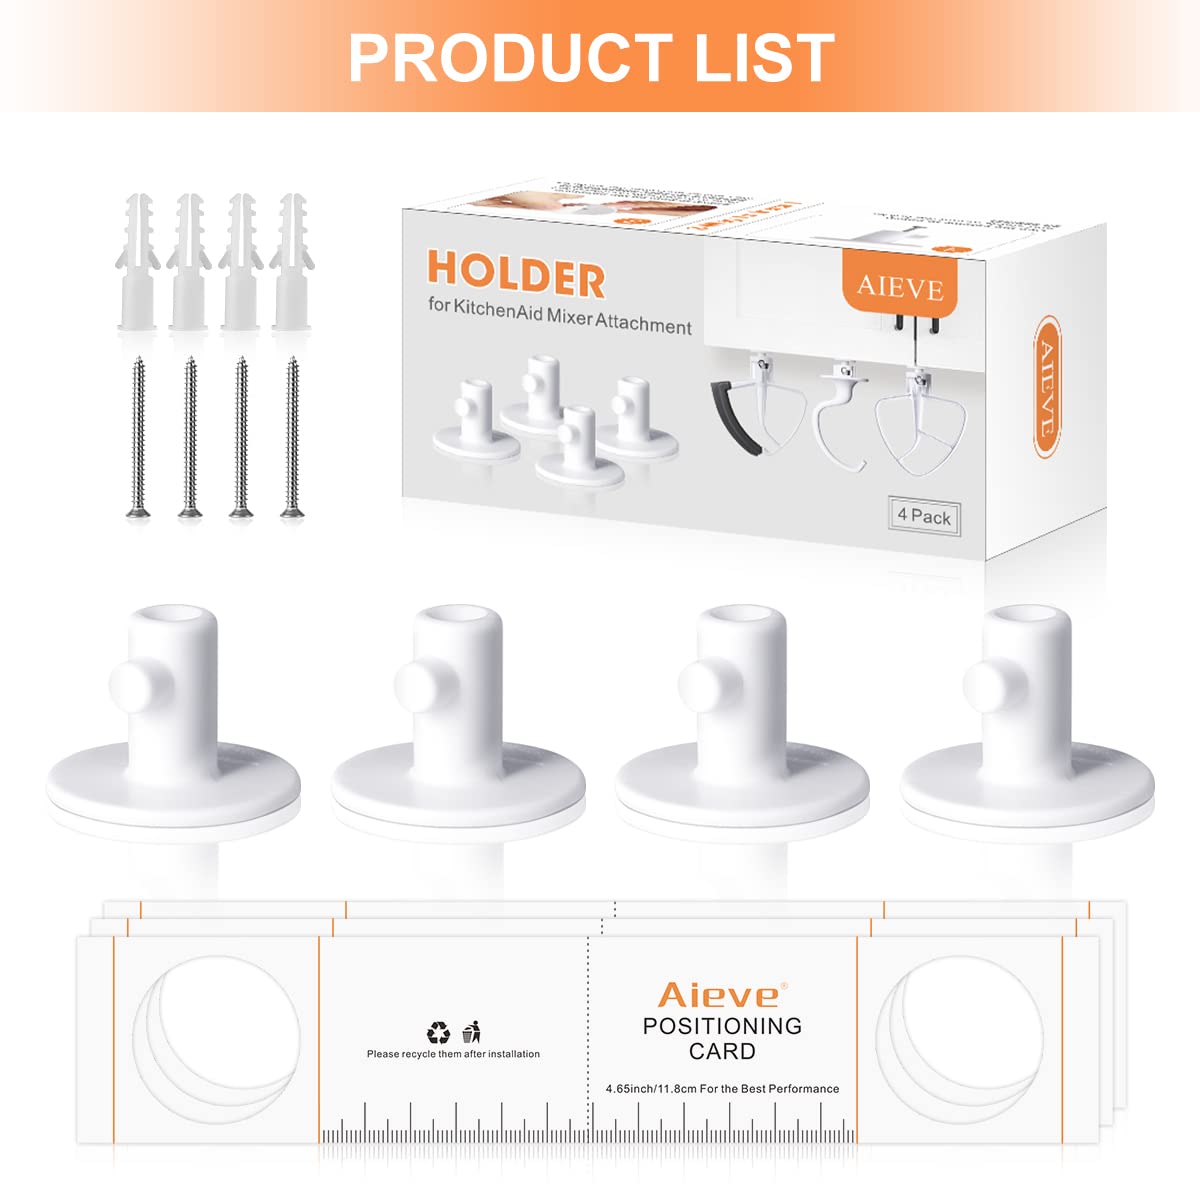 Attachment Holders product list